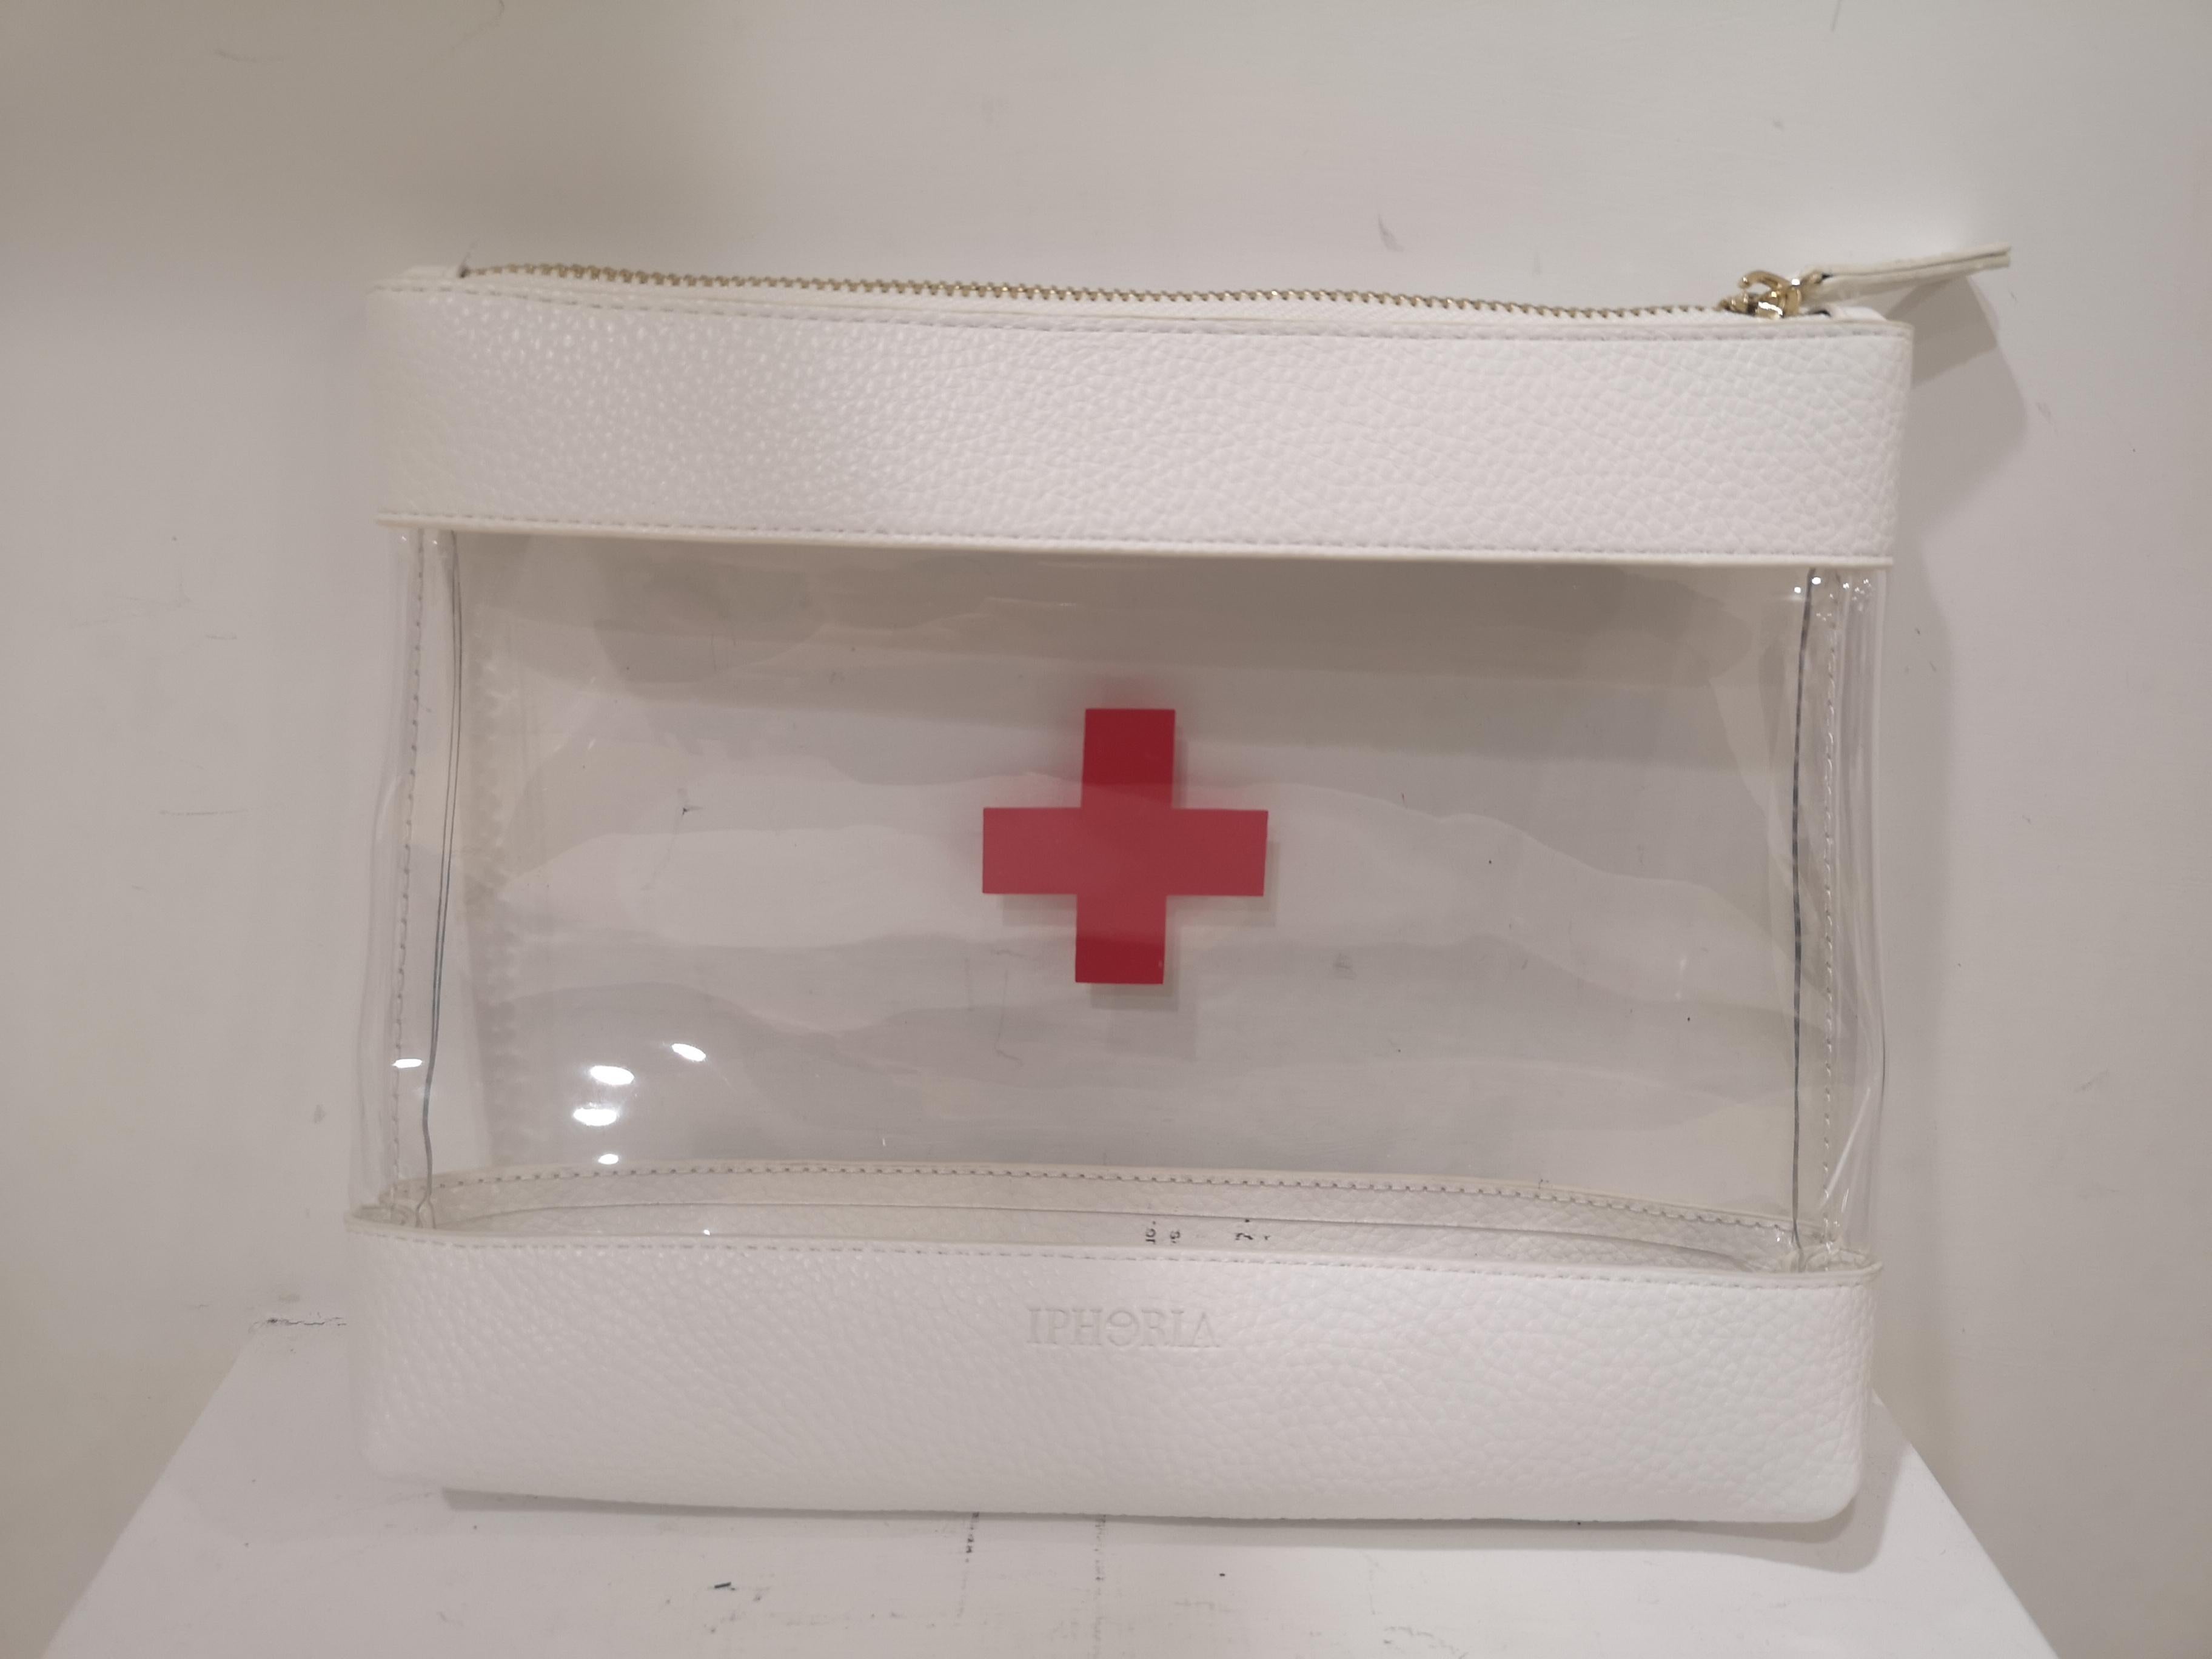 See-through necessary bag
a usefull idea for travellers
first aid beauty kit
measurements: 24*19 cm depth 4 cm